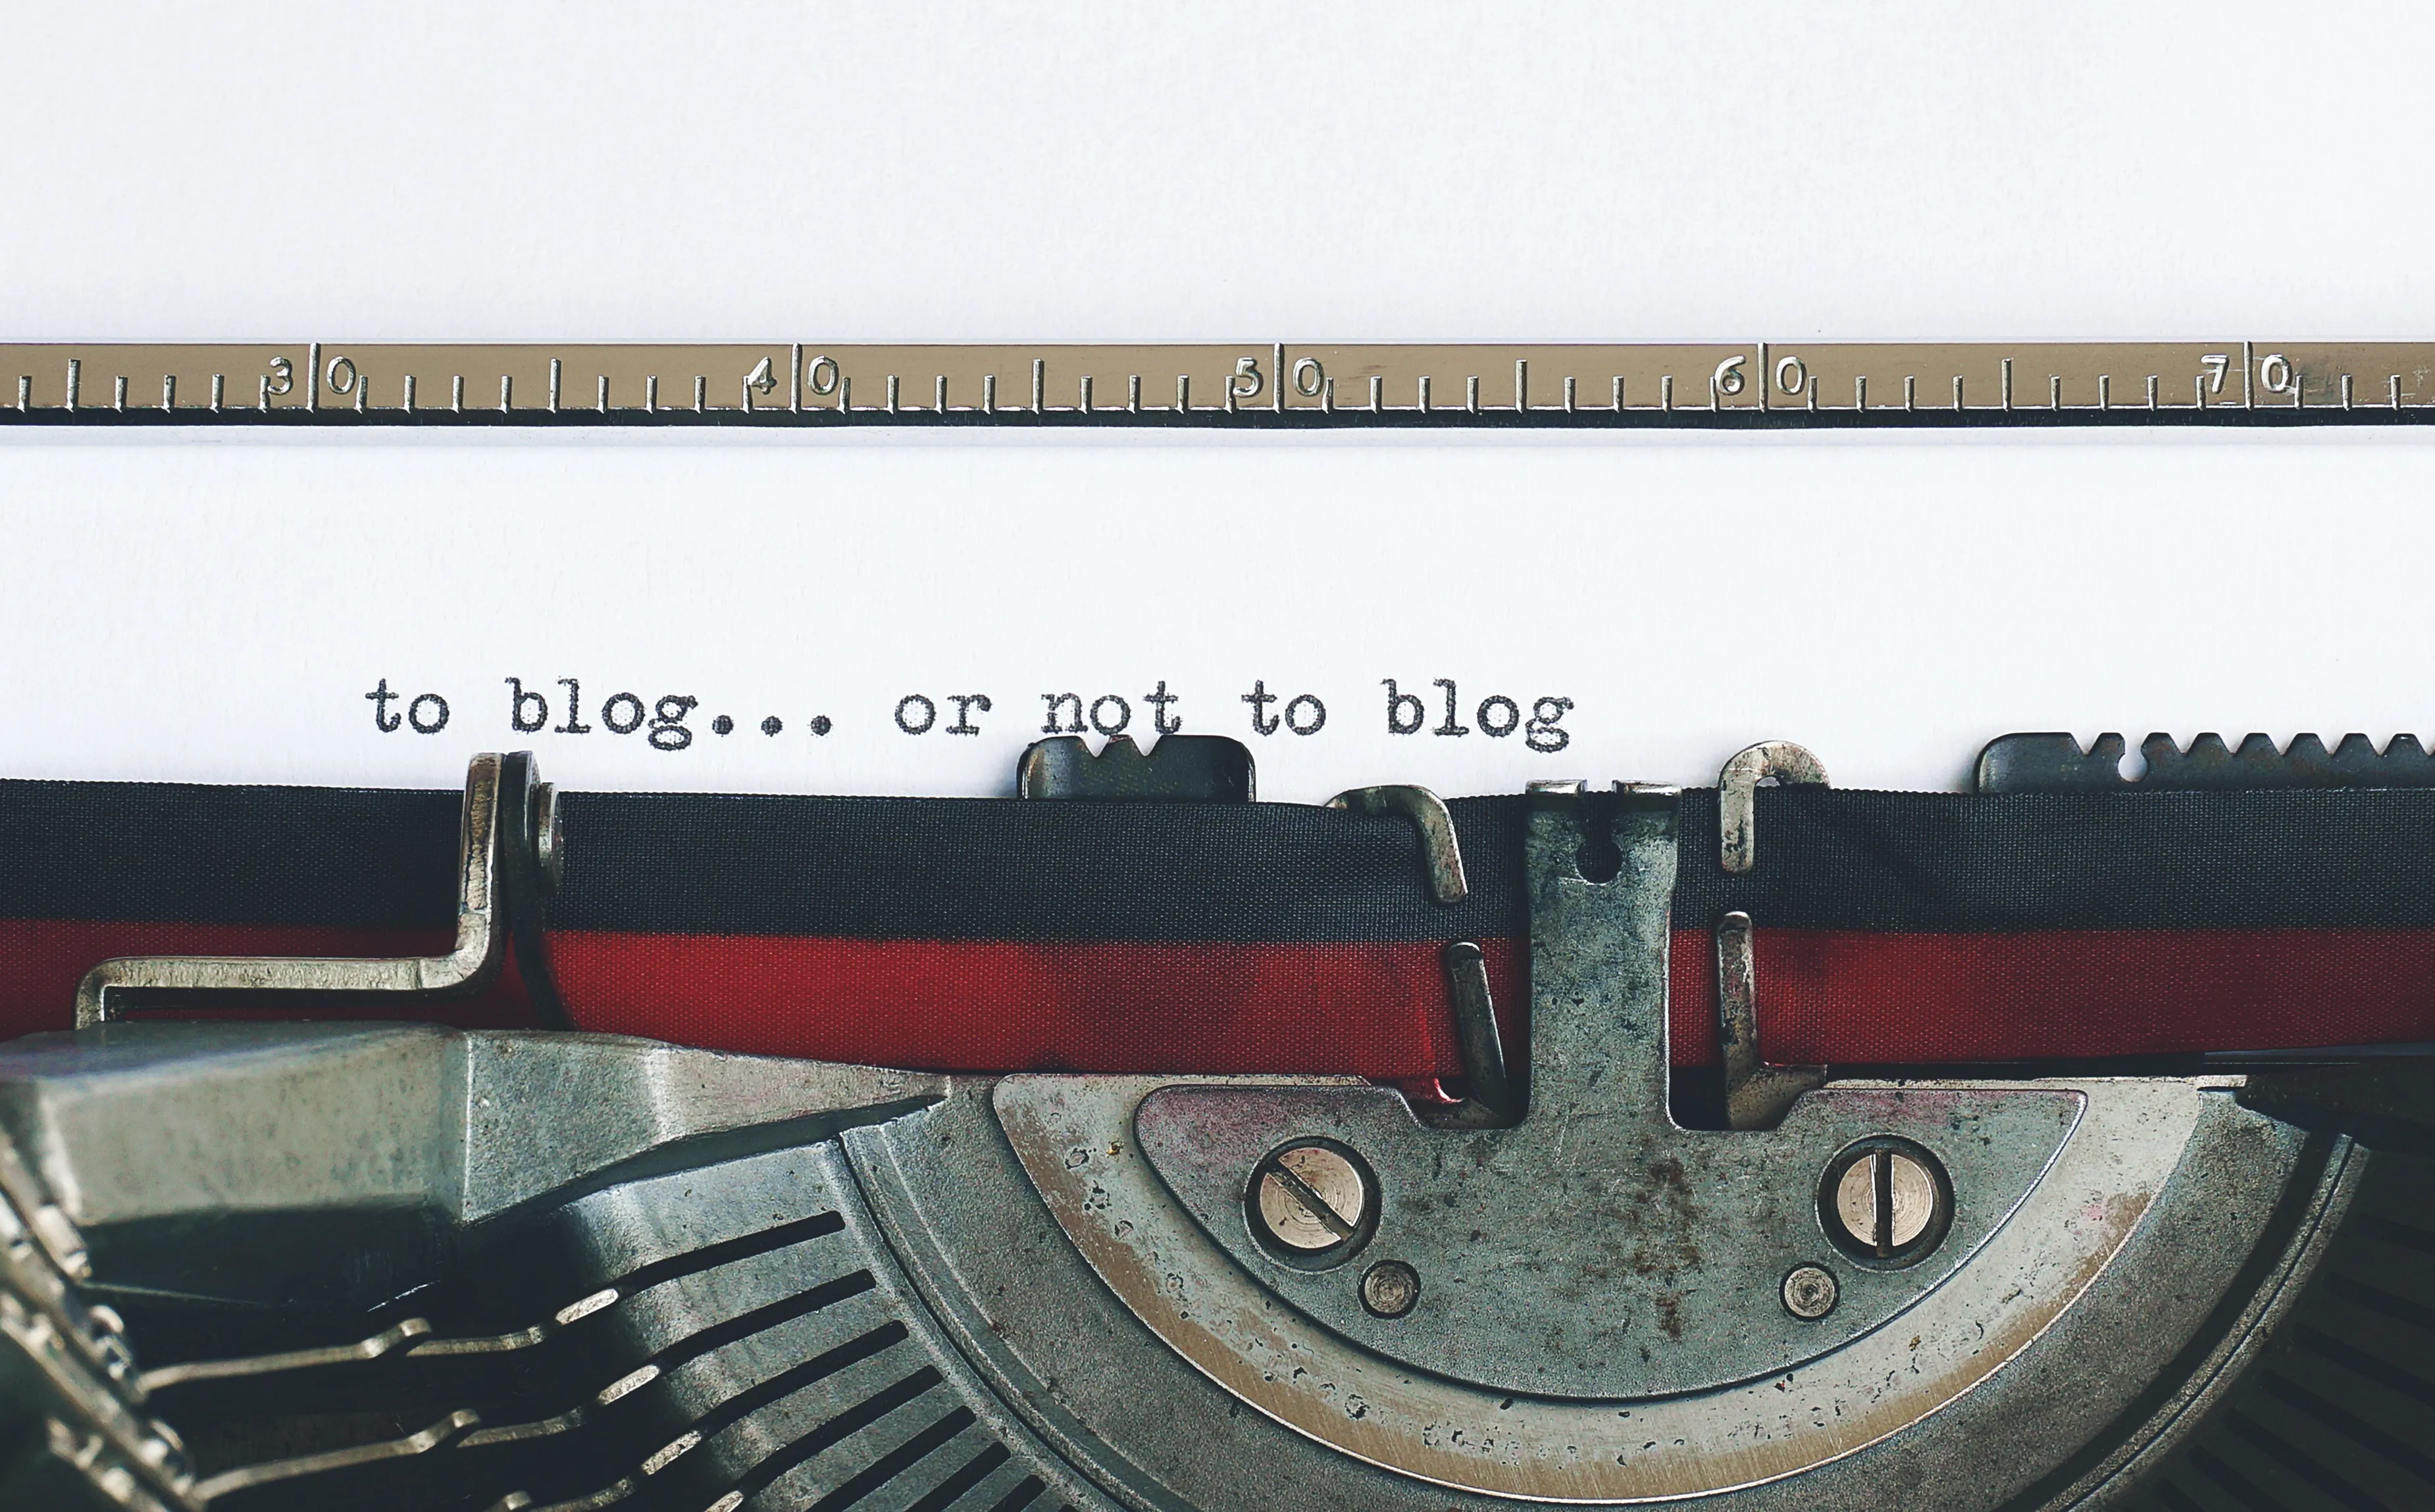 Typewriter with a sheet of paper, having typed the words: TO BLOG OR NOT TO BLOG